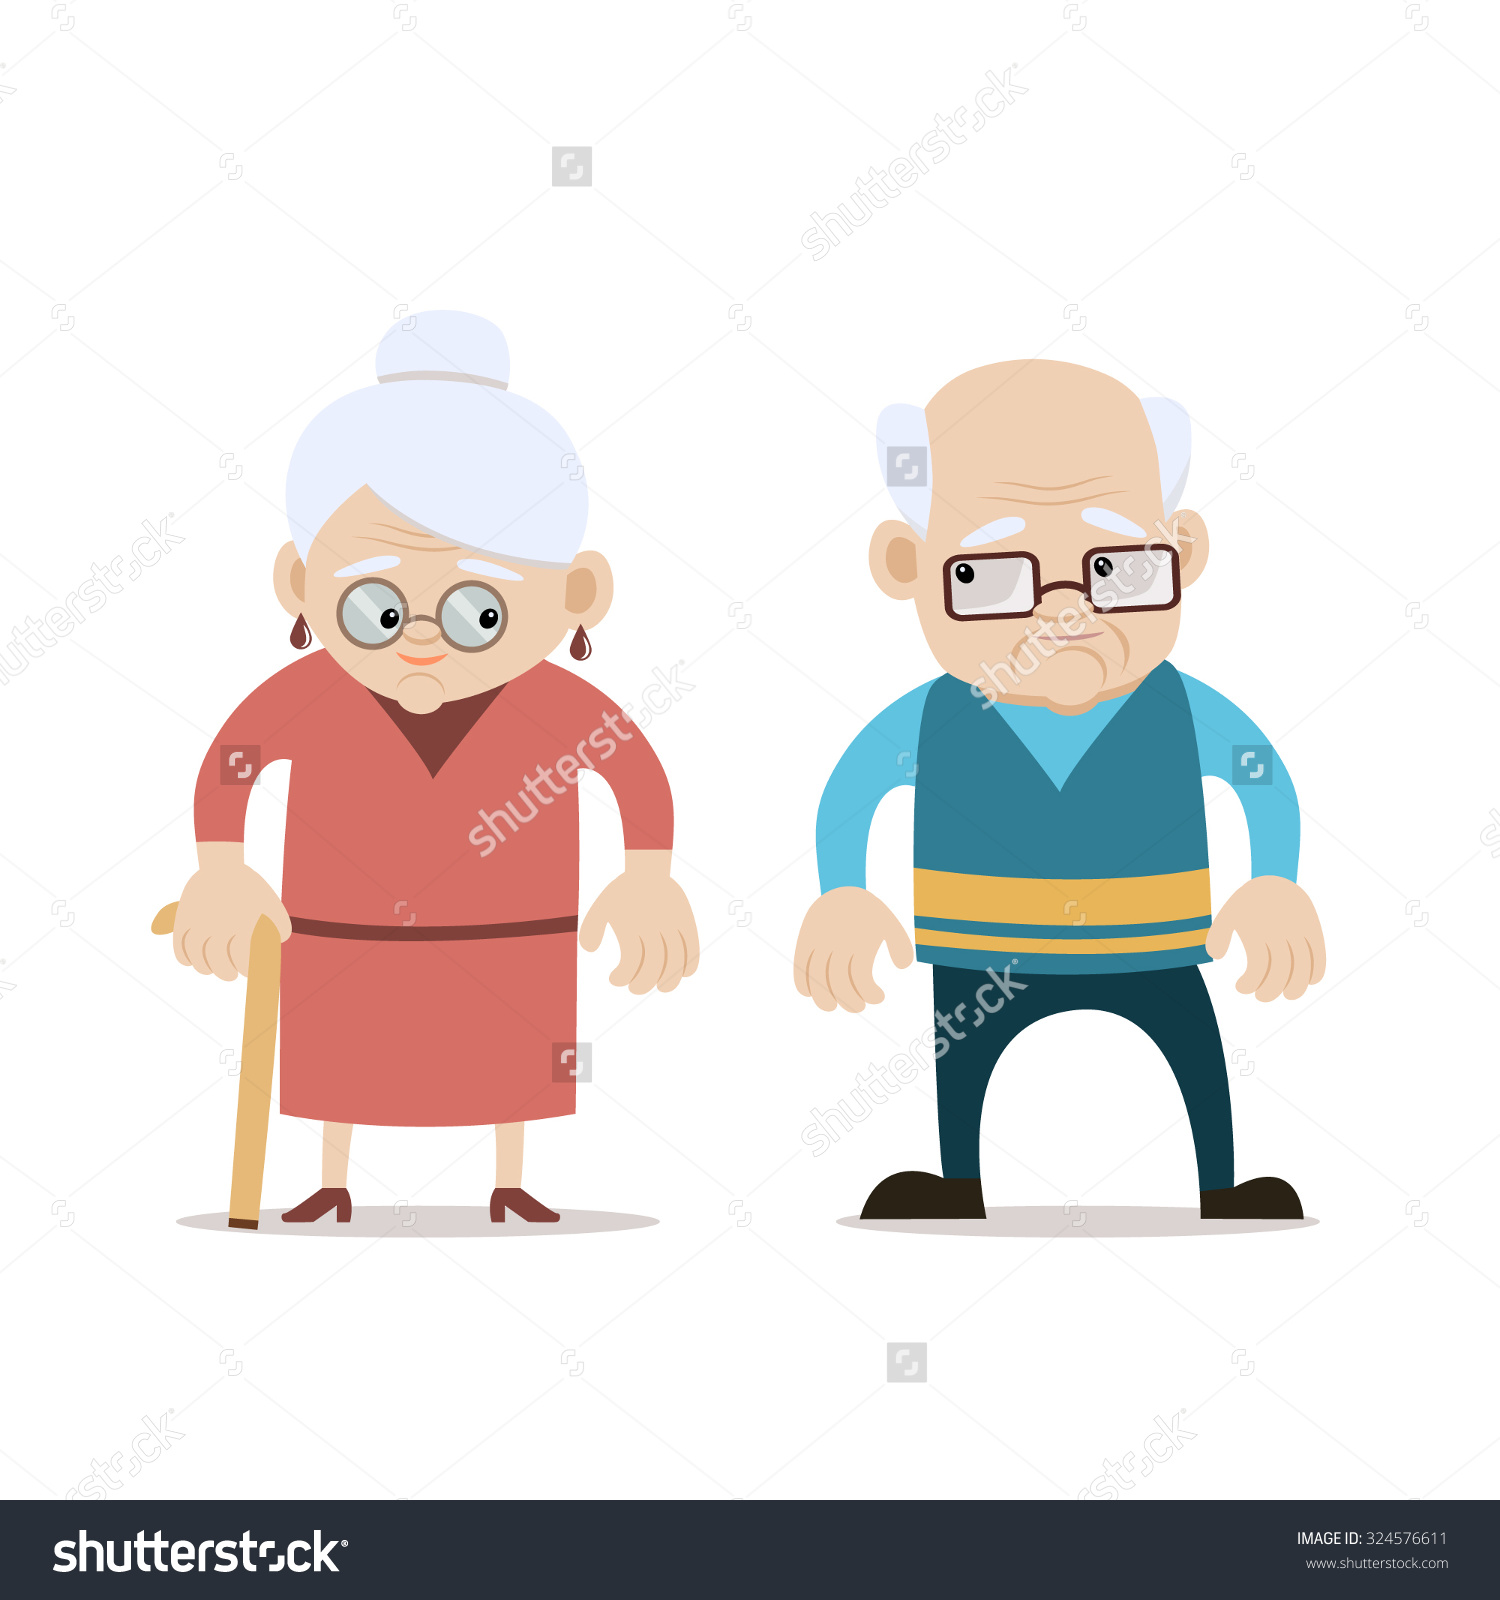 roblox stage old man old woman face puzzle guess the famous characters